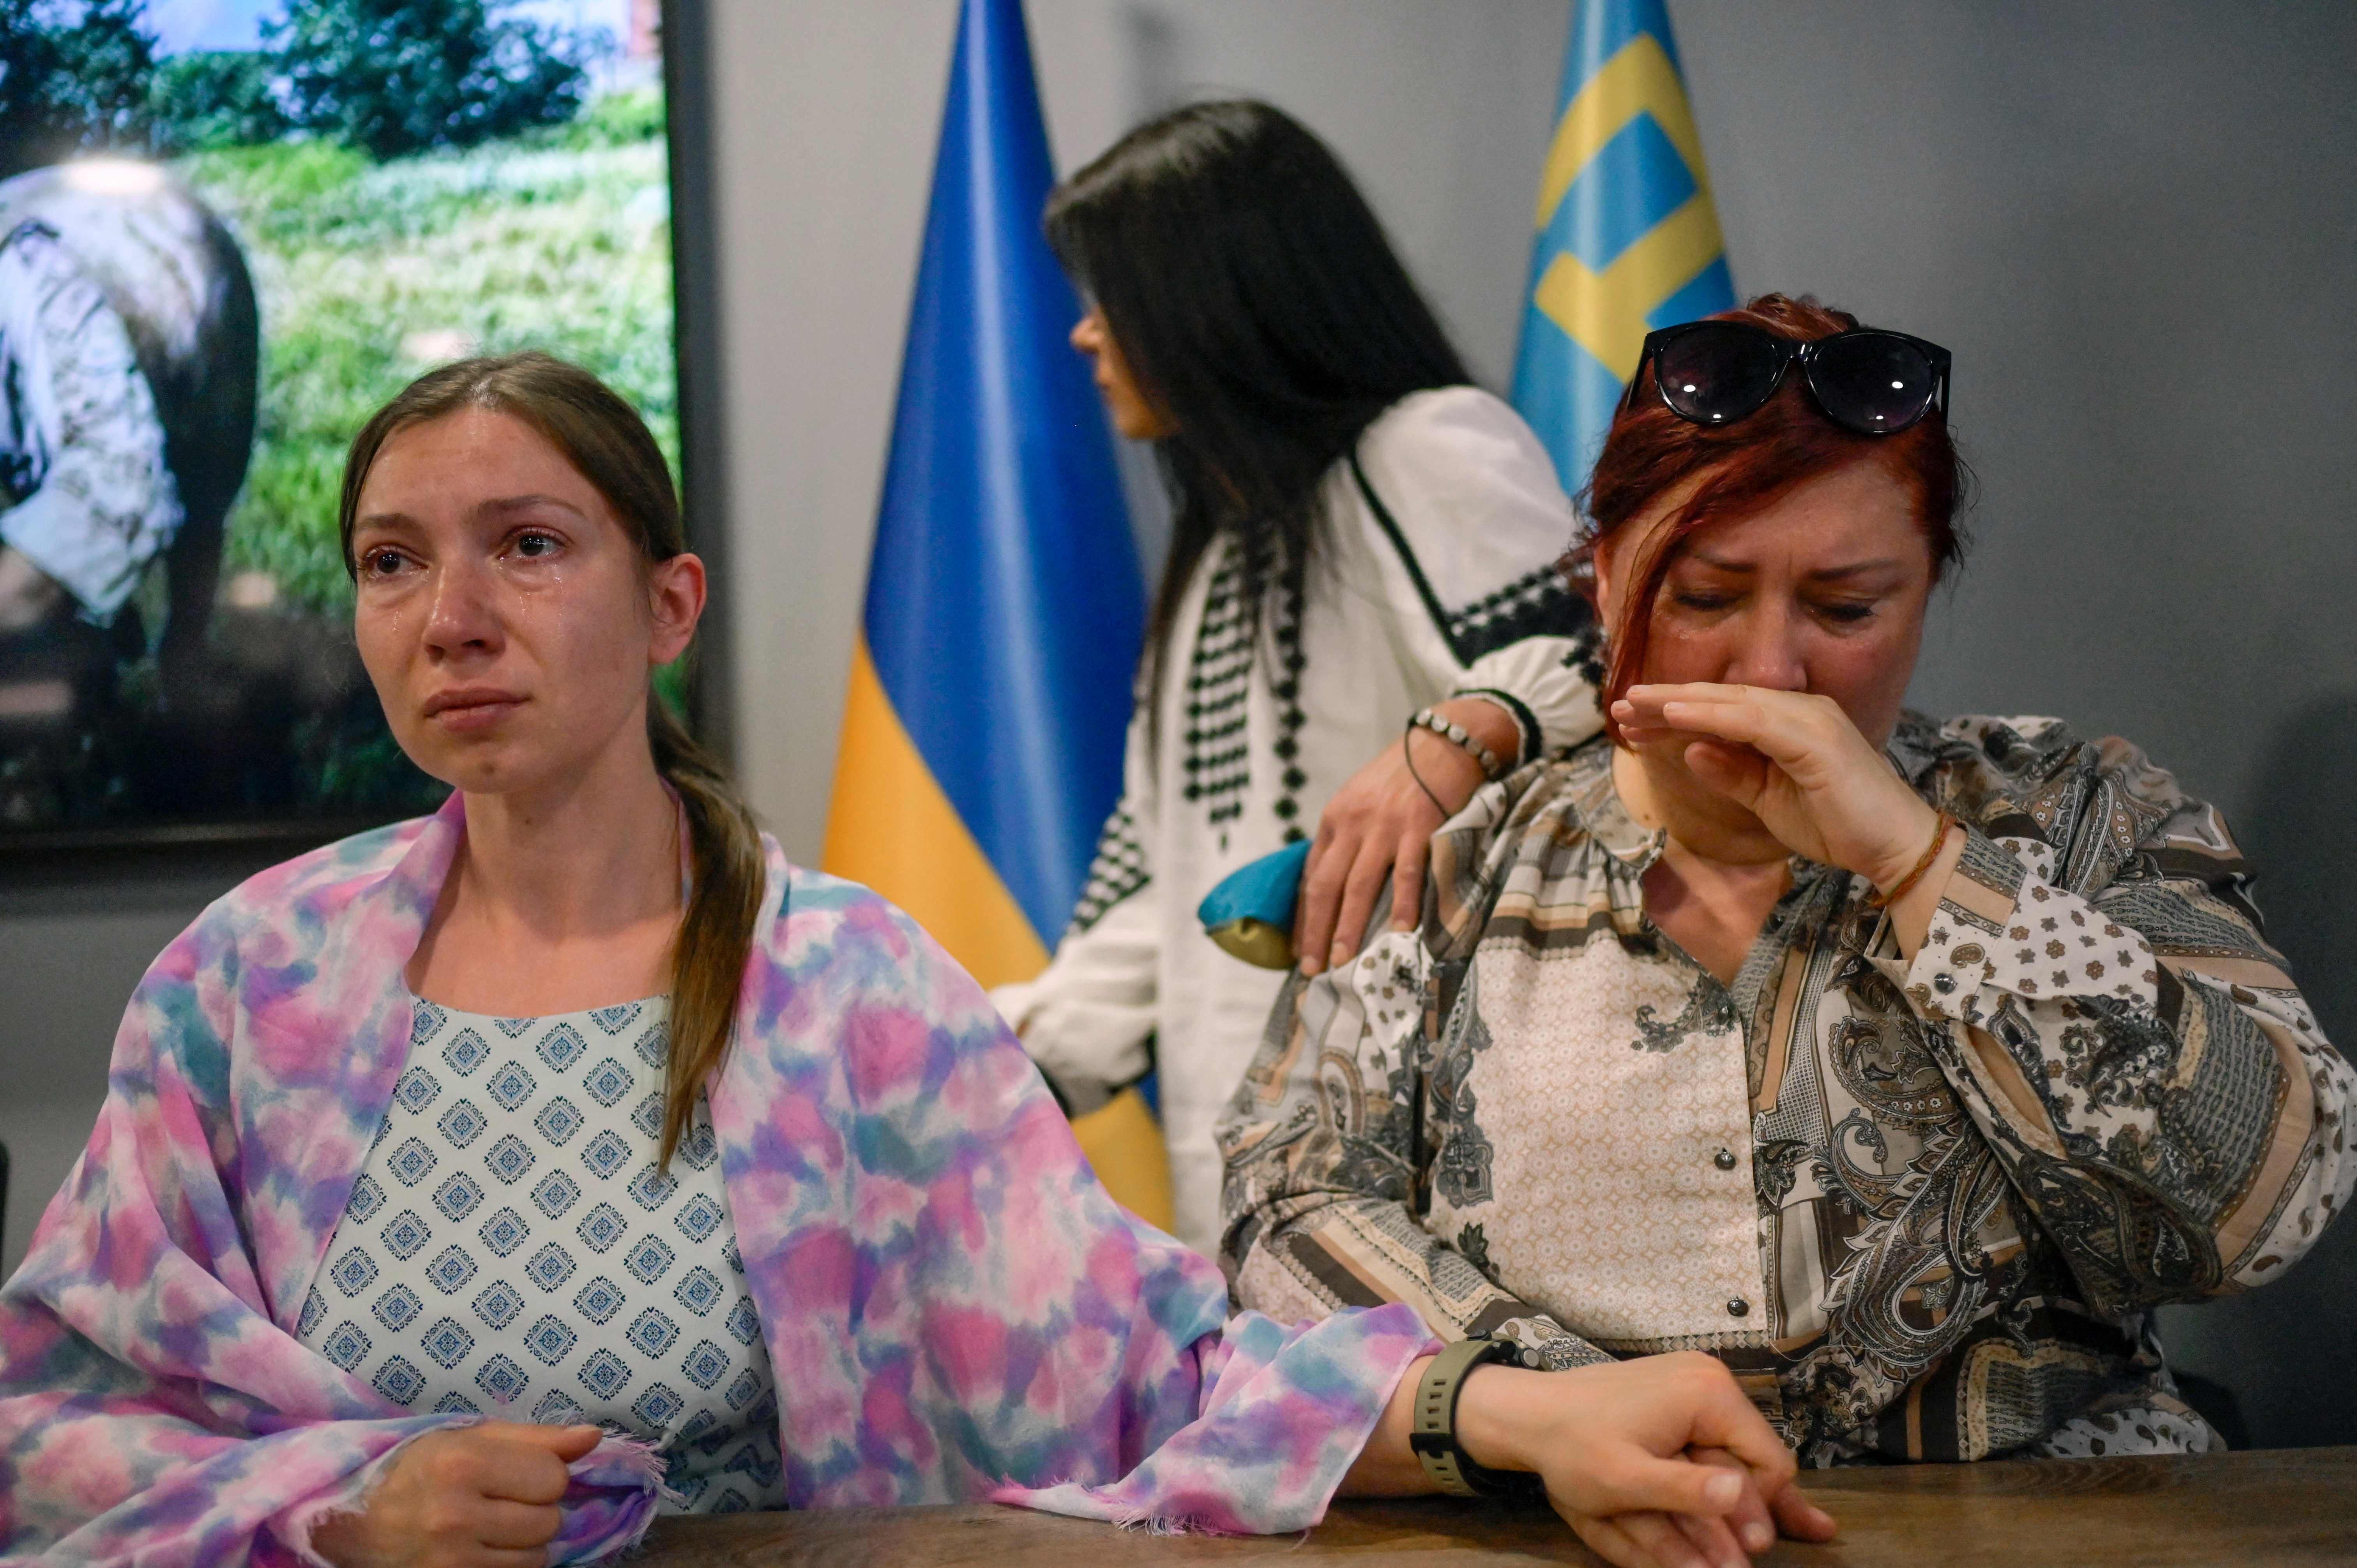 Natalia Zarytska (L), wife of an Azov fighter, and Natalia (R), mother of an Azov fighter, attend a press conference, in Istanbul